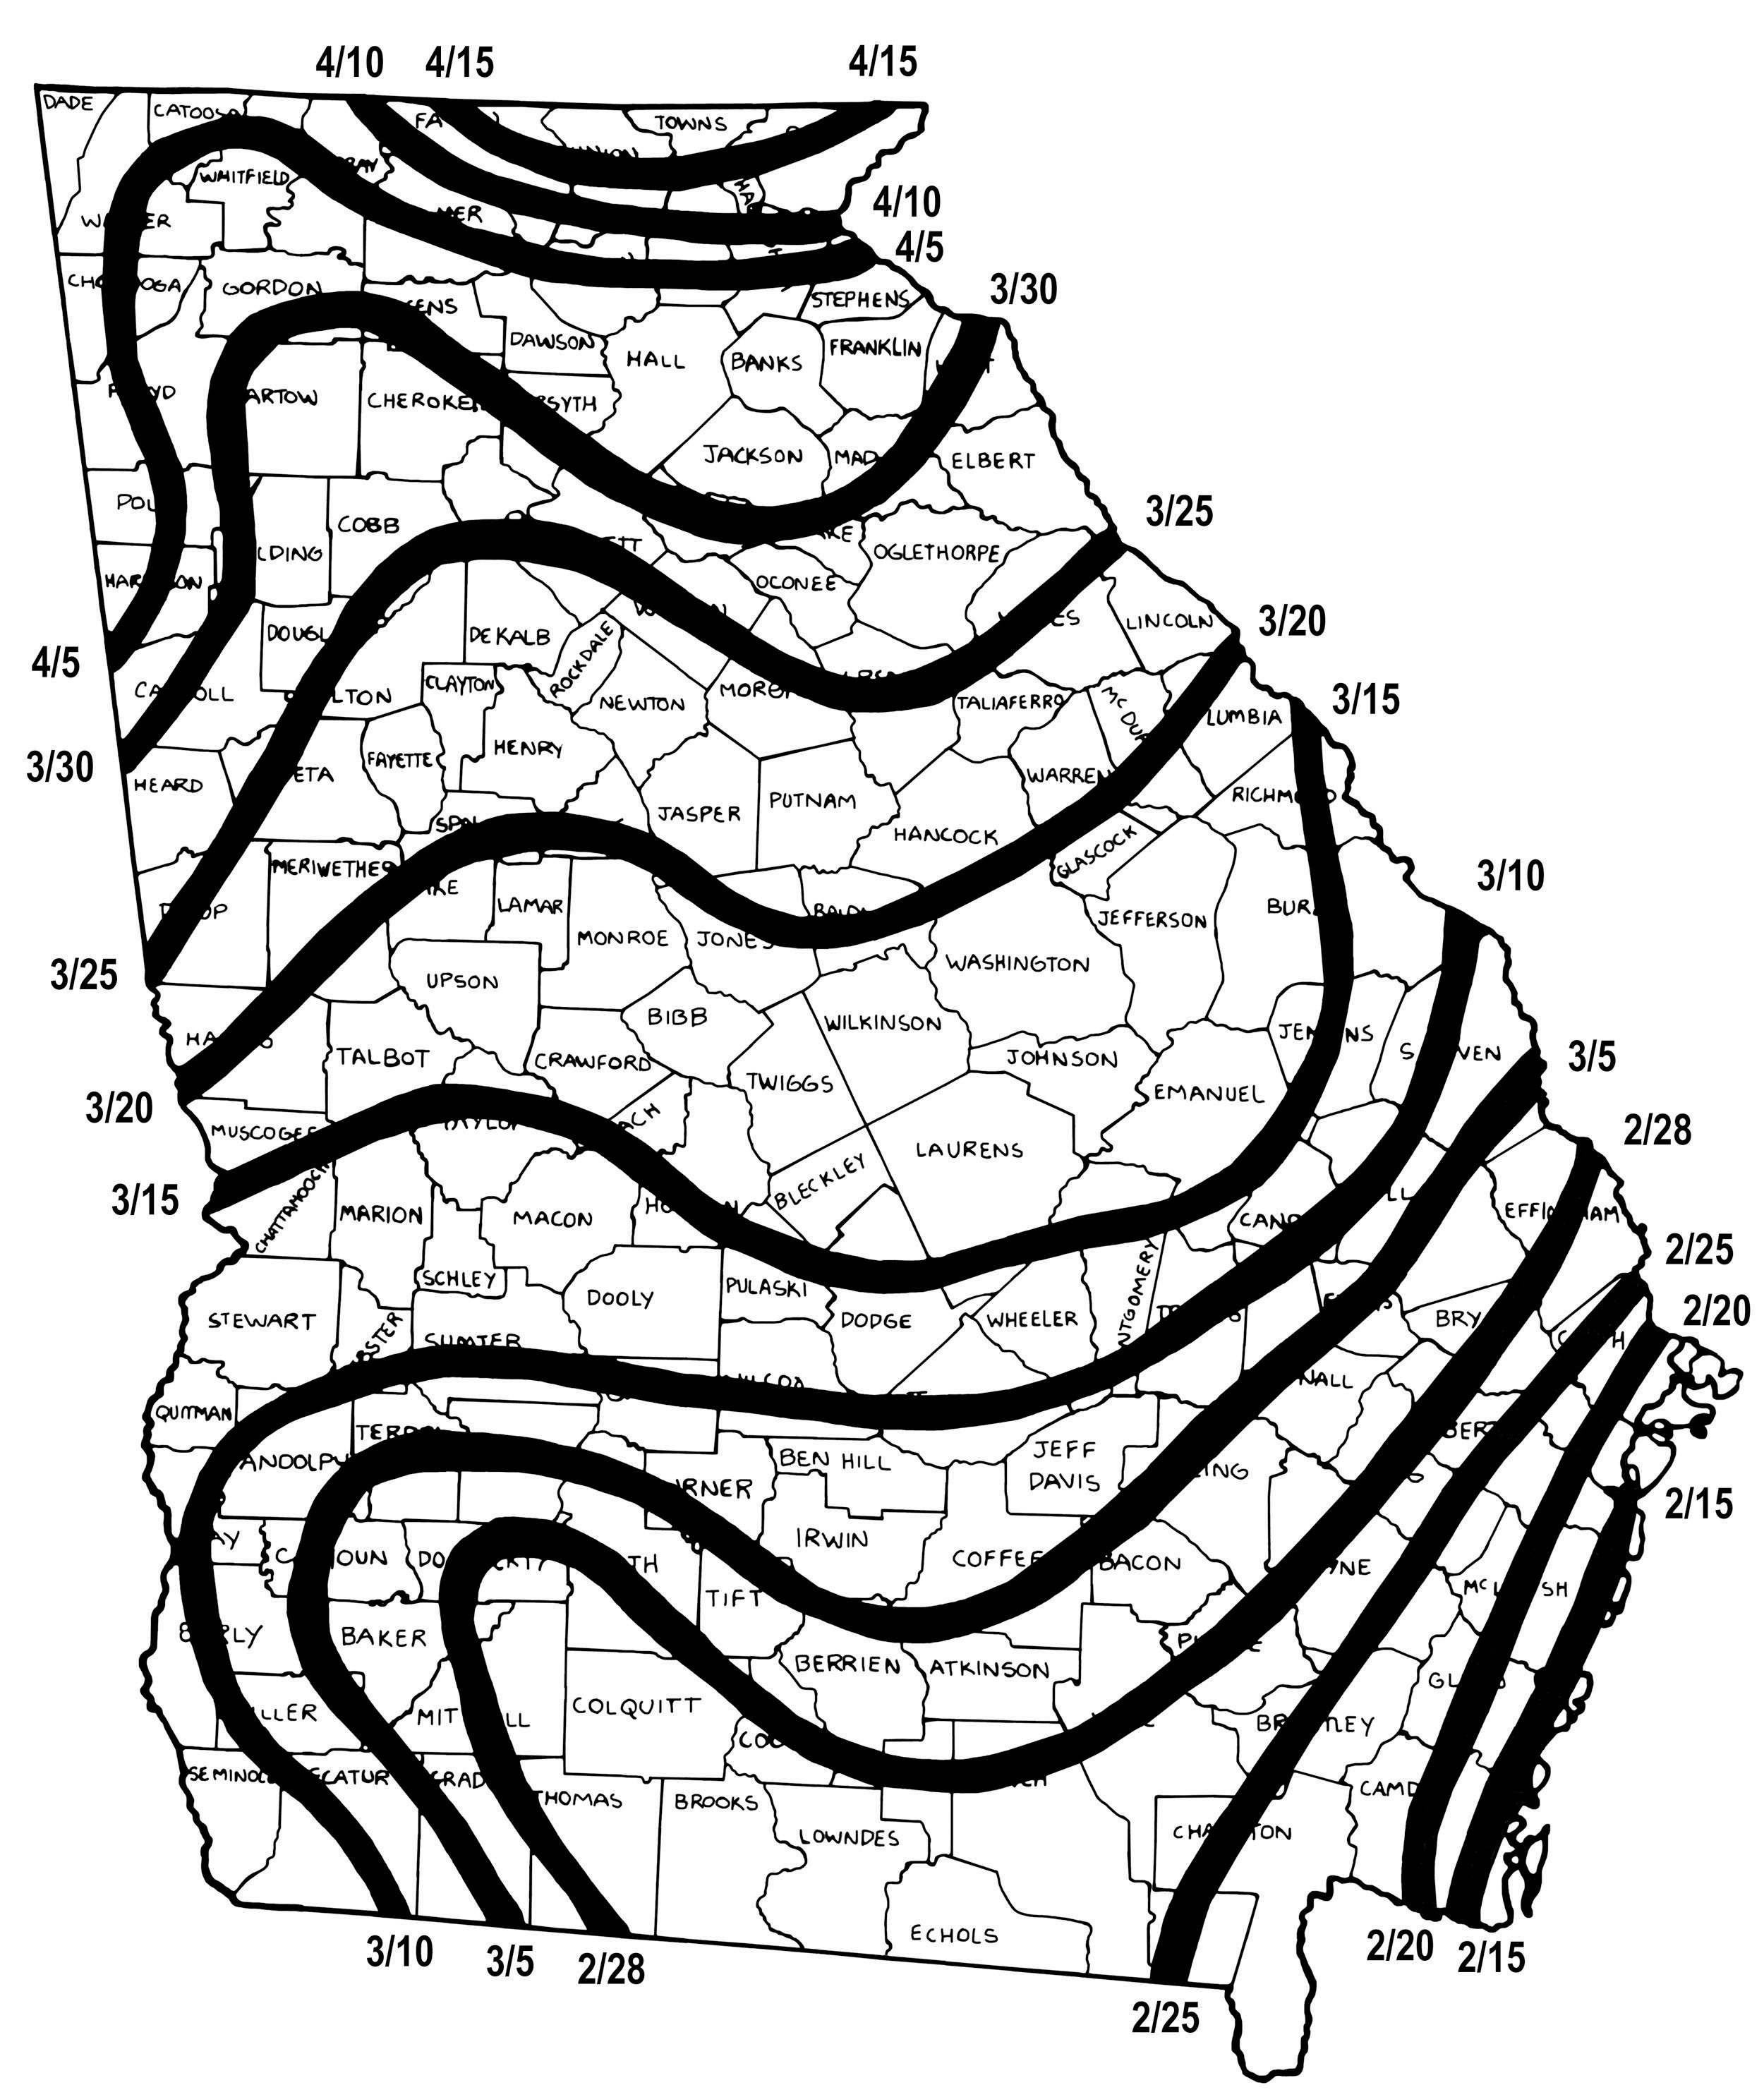 Map of Georgia showing the approximate date of the last spring frost. Dates range from 4/15 in the north of the state to 2/15 along the coast